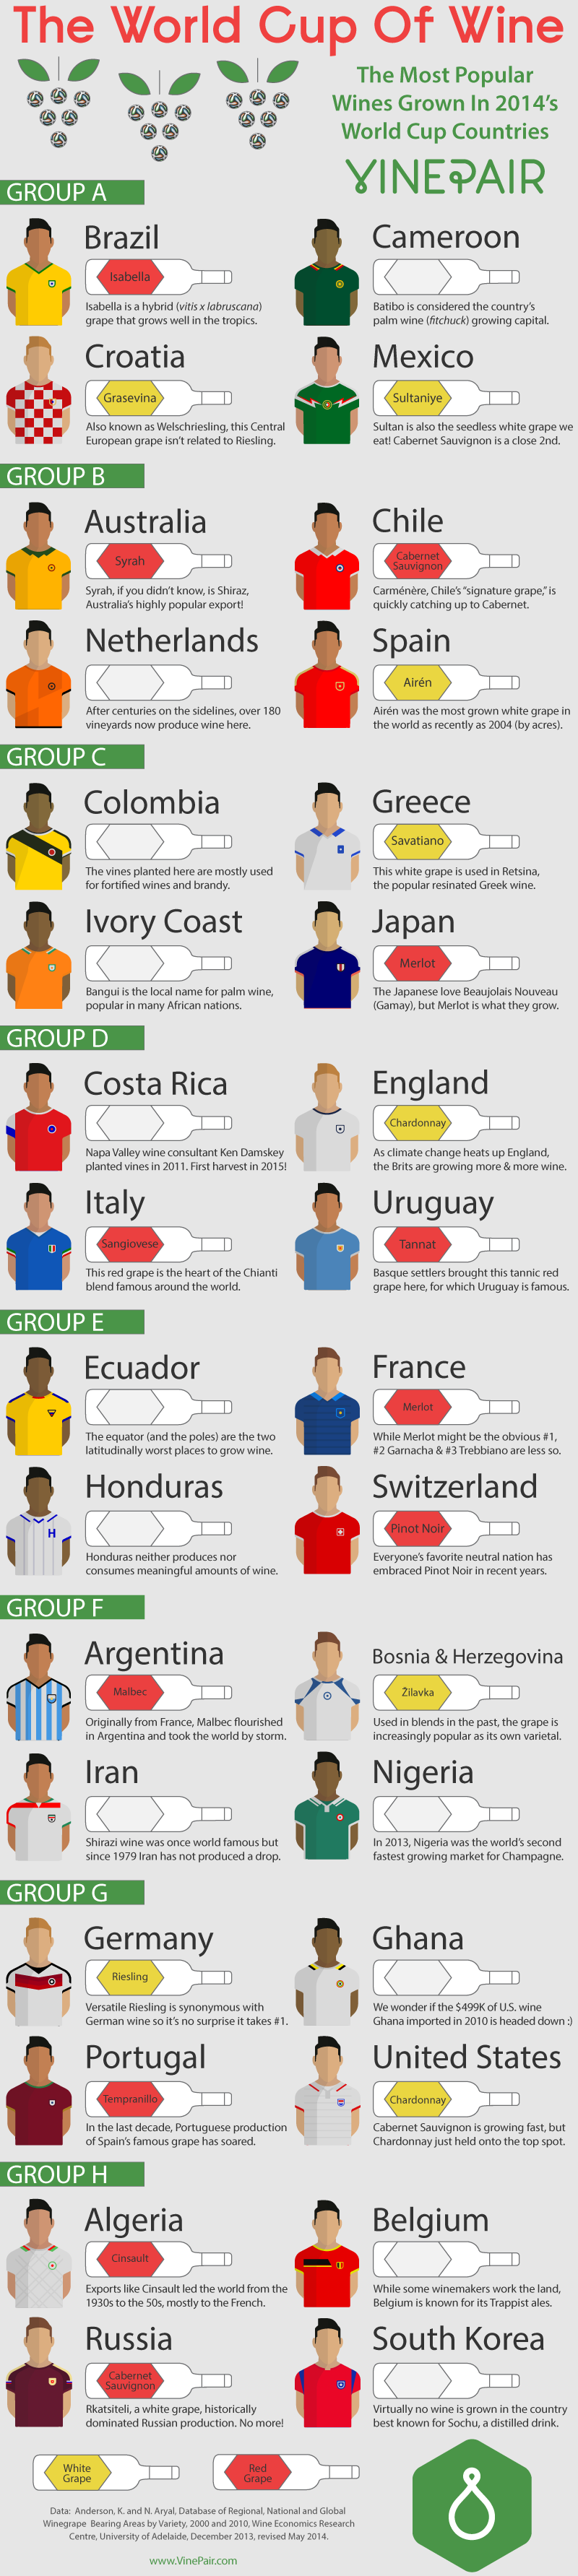 The World Cup Of Wine Infographic 2014